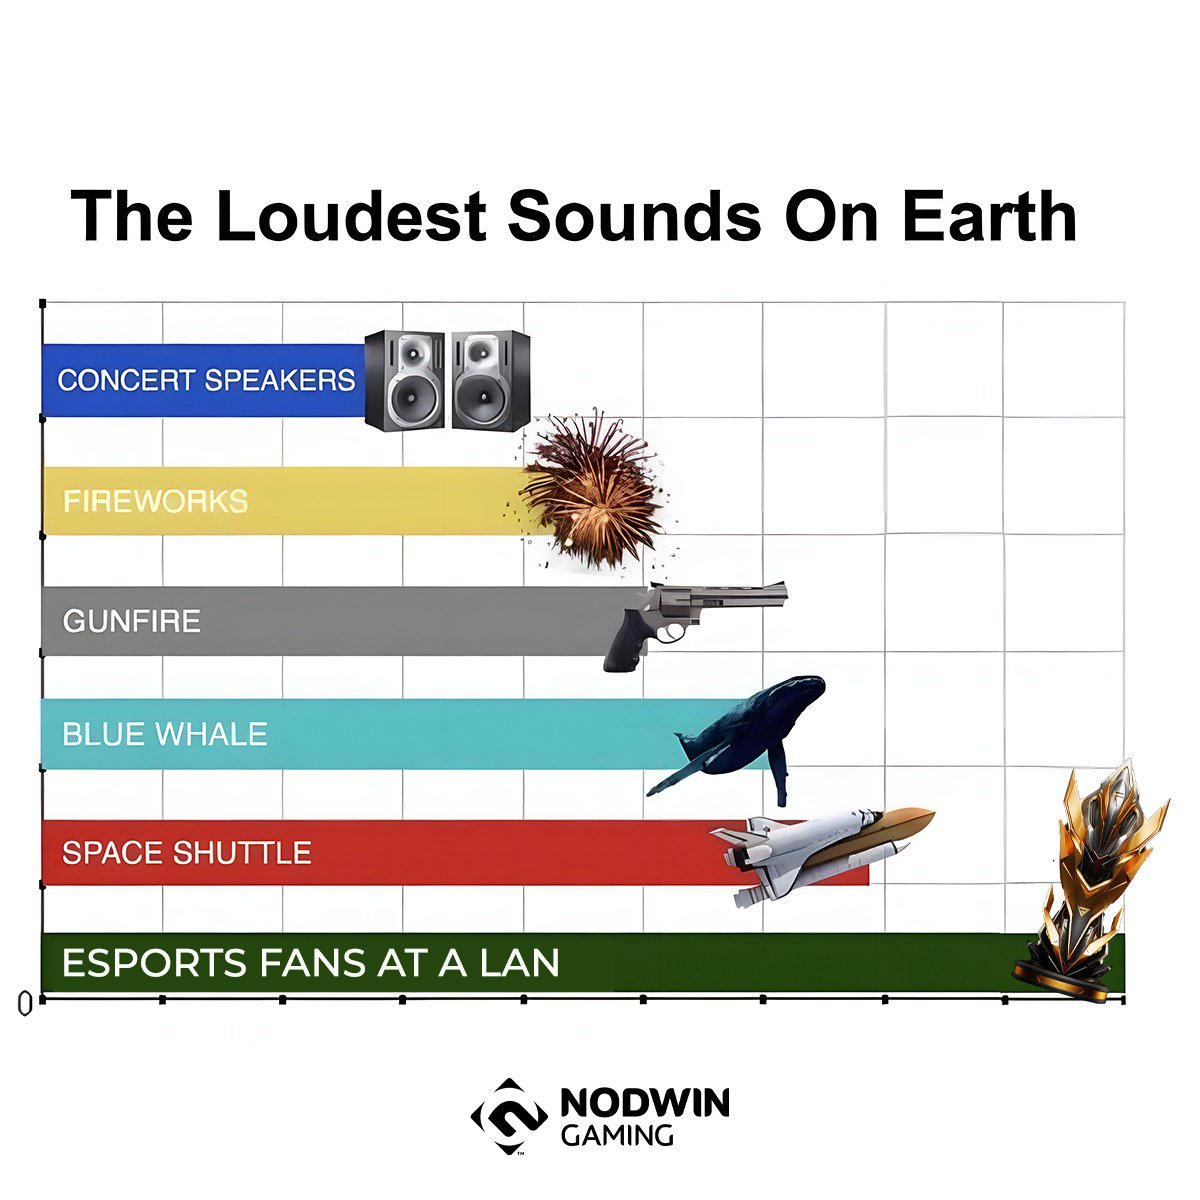 Decibels in order! Which lan event do you think brought the loudest thunder ever??
.
.
#vcsa #bgms #valorantchallengers #bgmi #esports #esportslan #gamingmemes #gamingcommunity #indiangamingcommunity #indiangaming